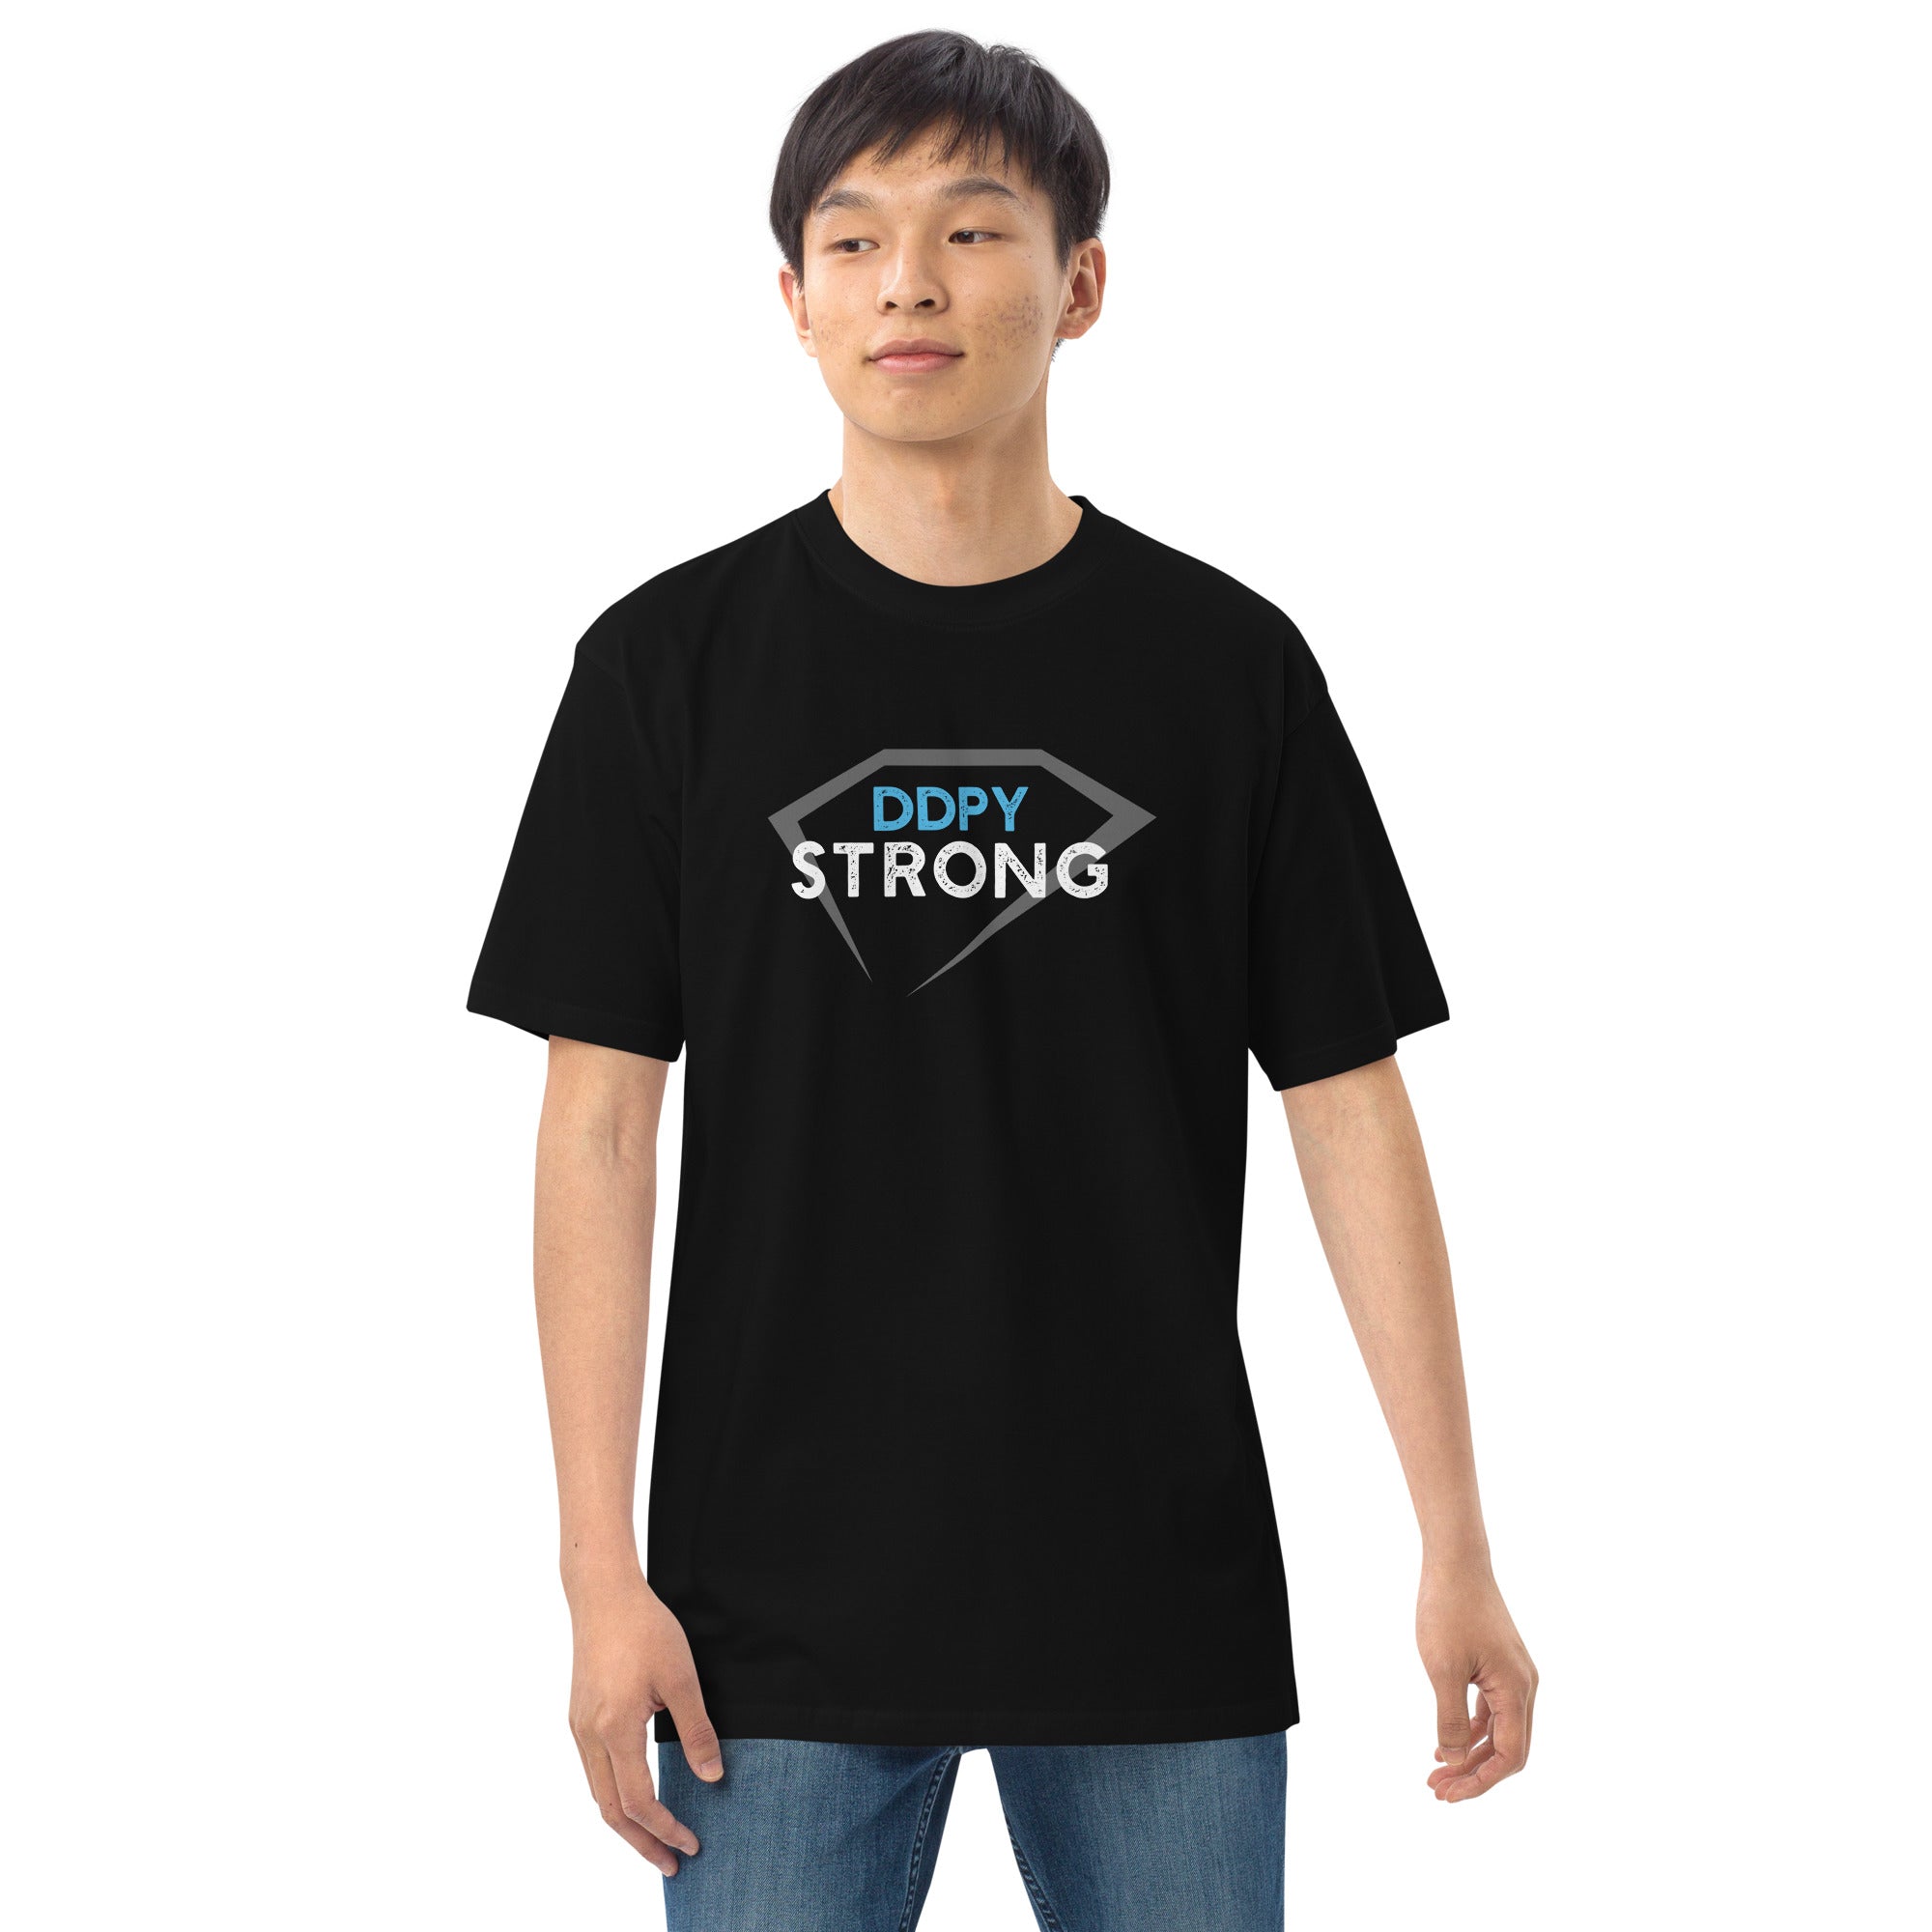 DDPY Strong Shirt (On Demand Printing)